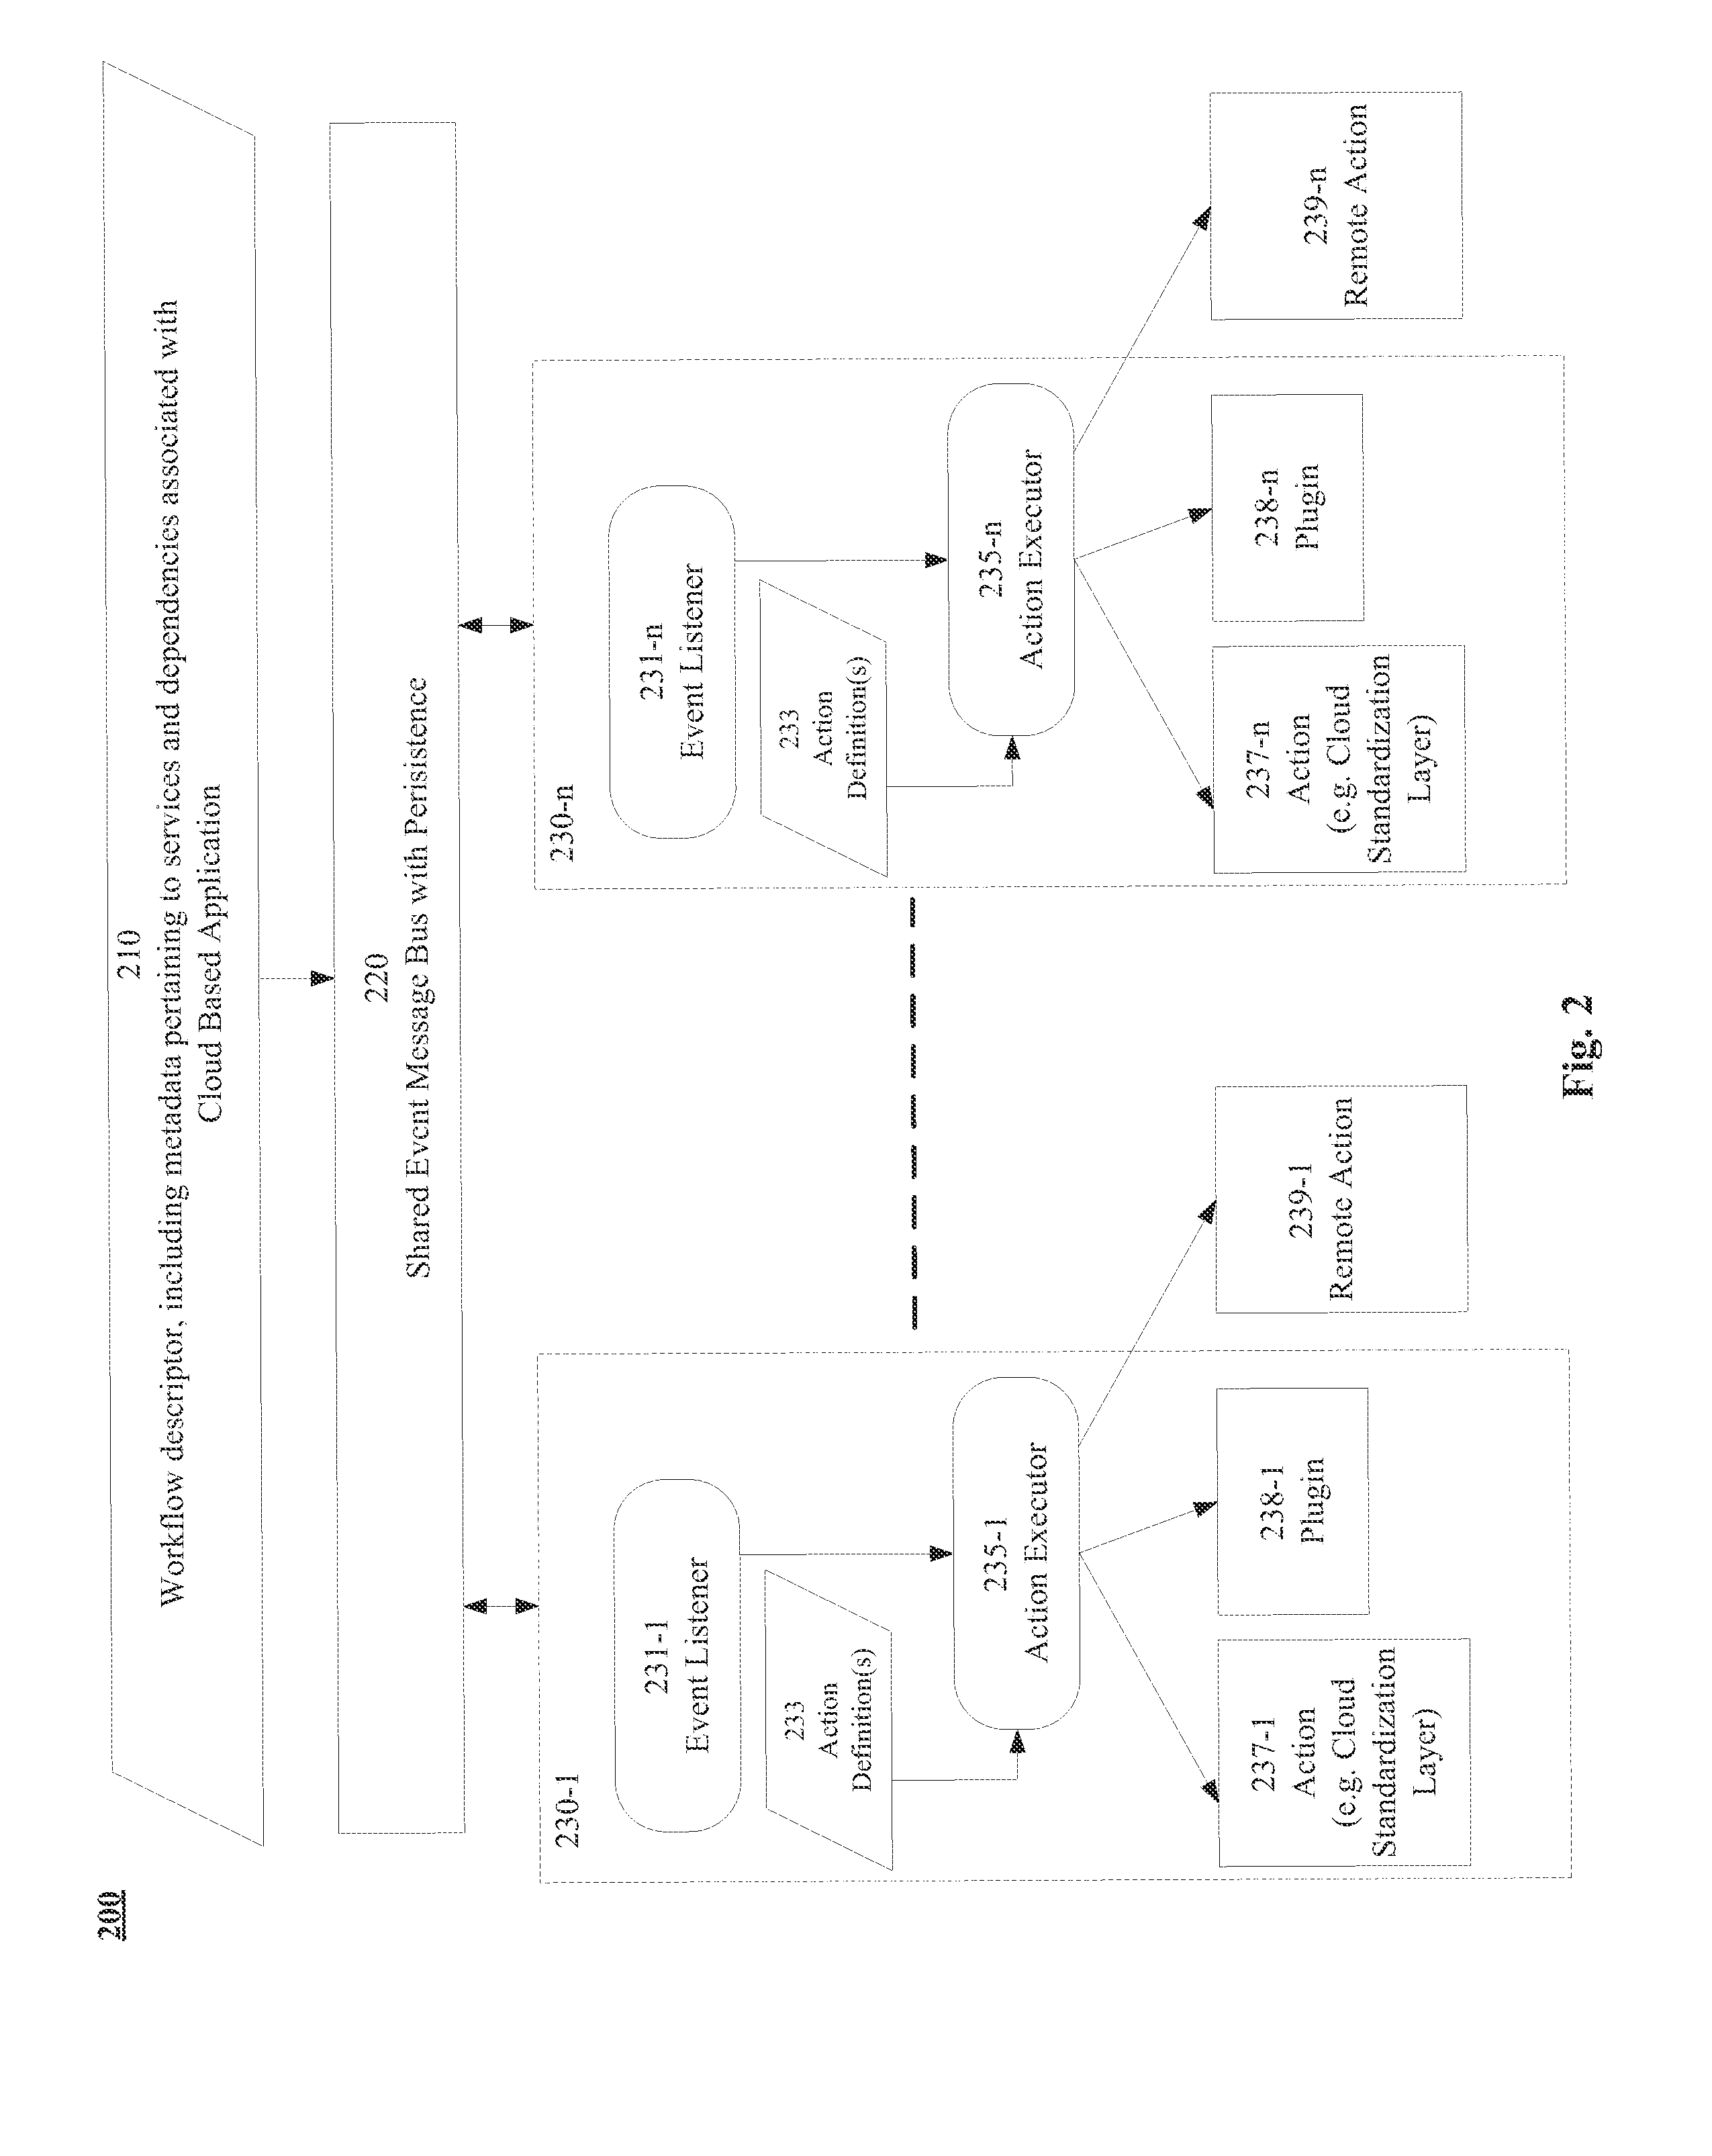 Apparatus, systems, and methods for distributed application orchestration and deployment